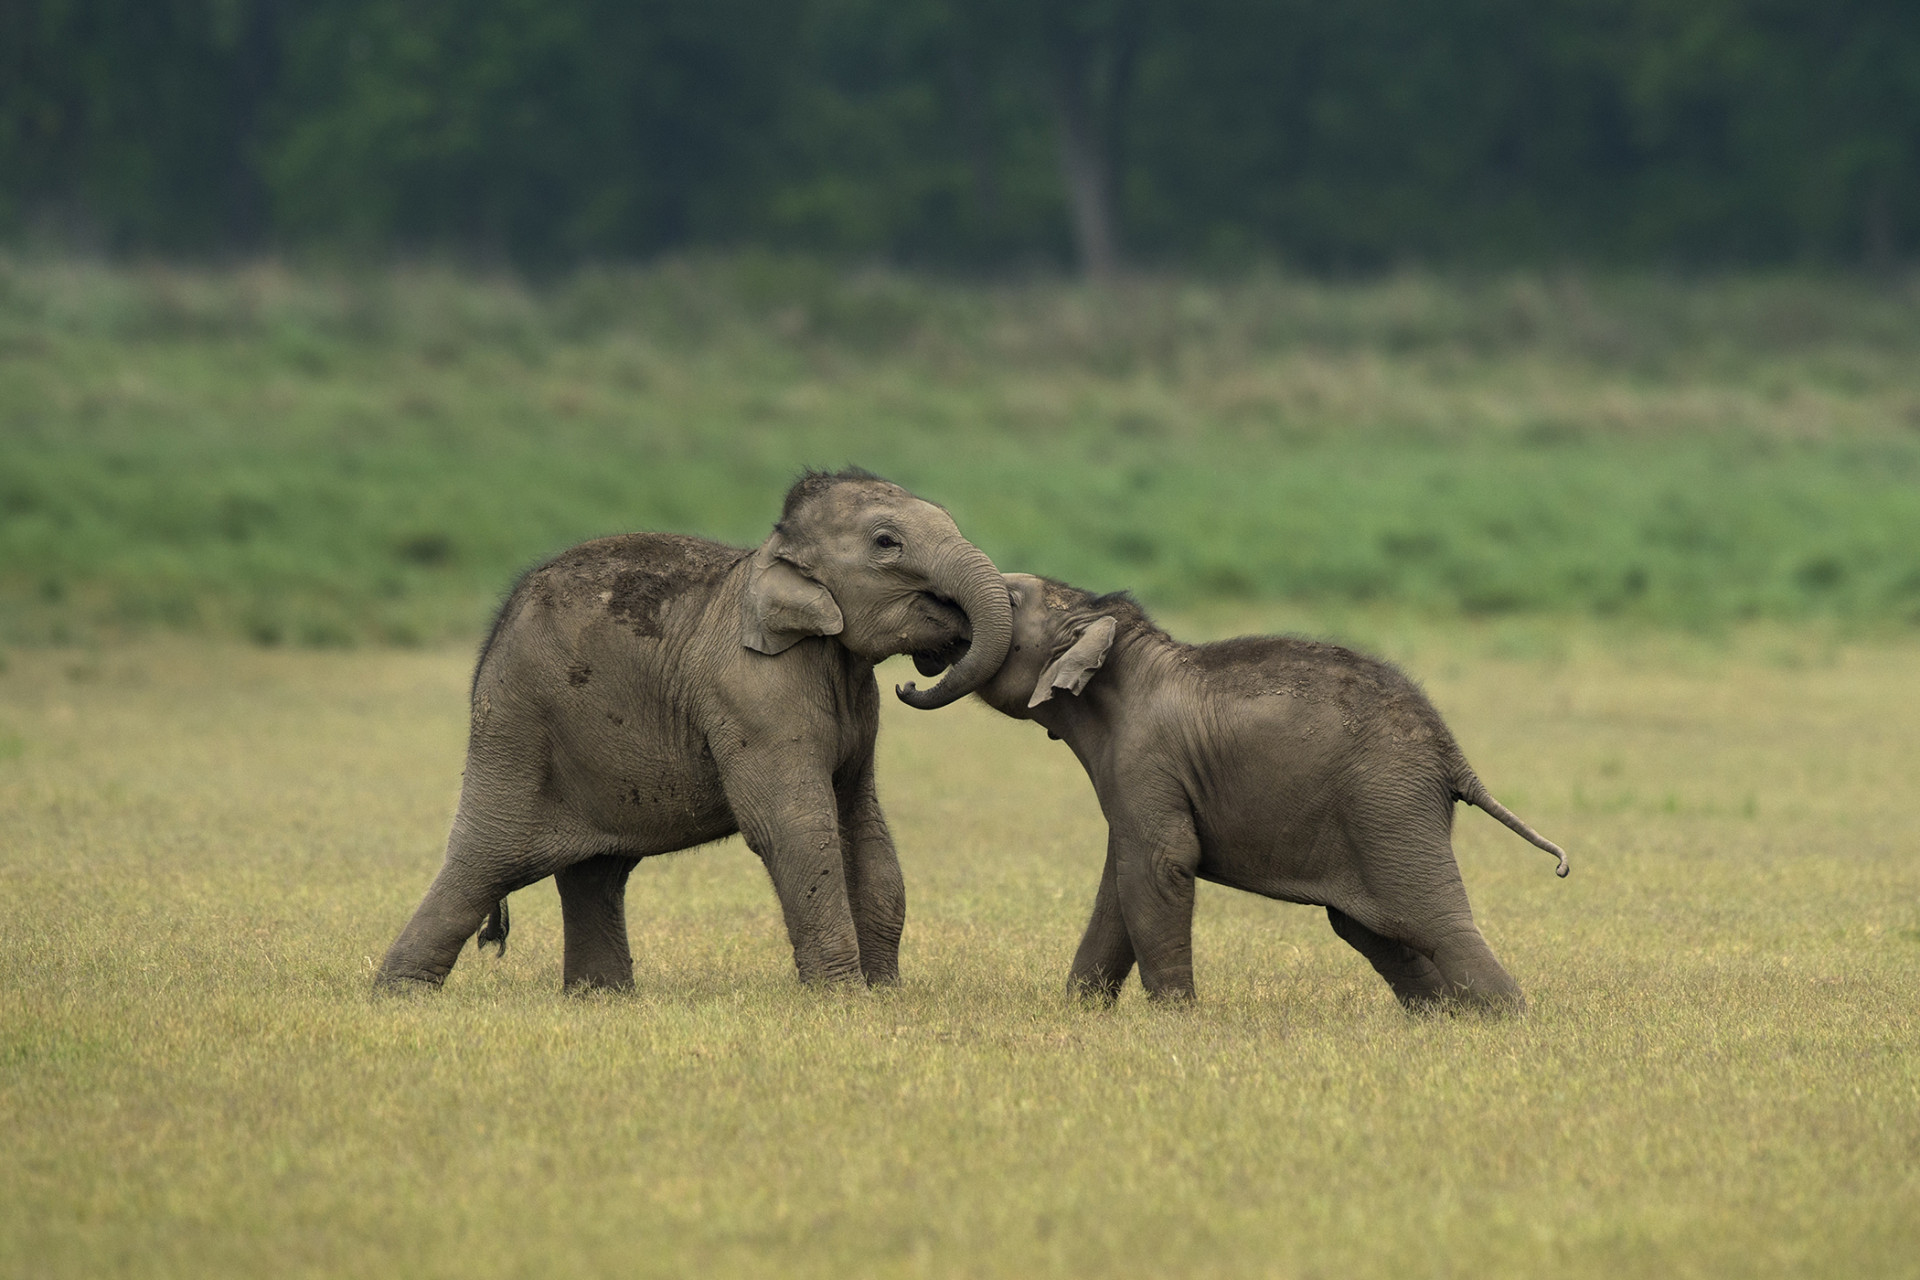 Young elephants at play